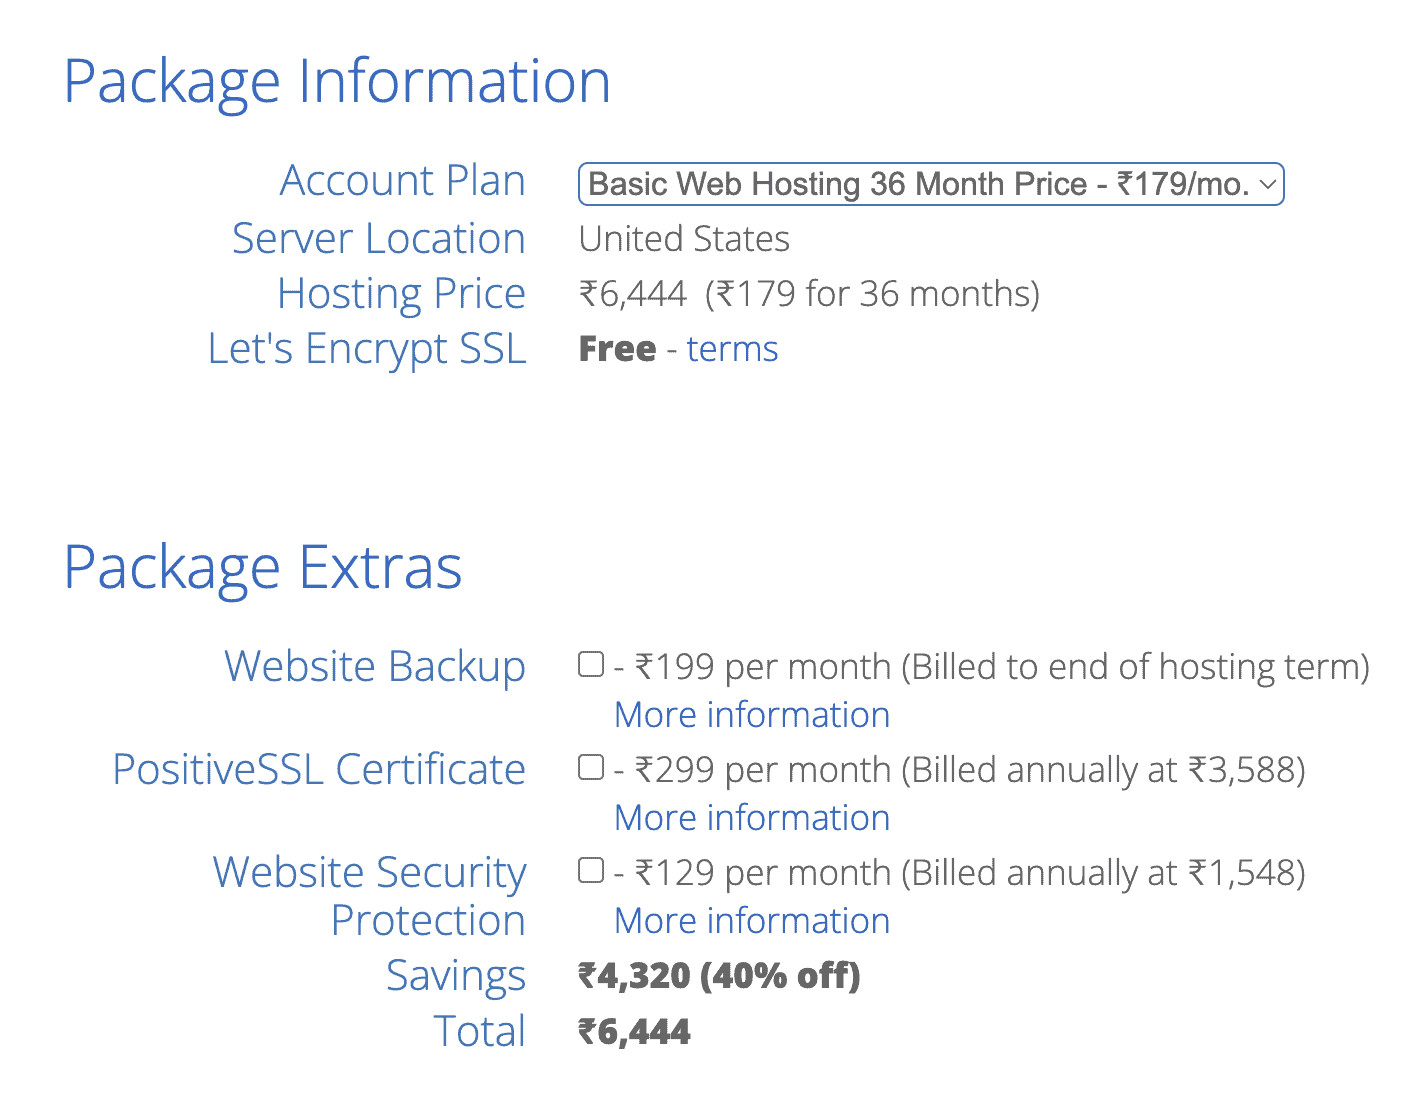 Choose the package details